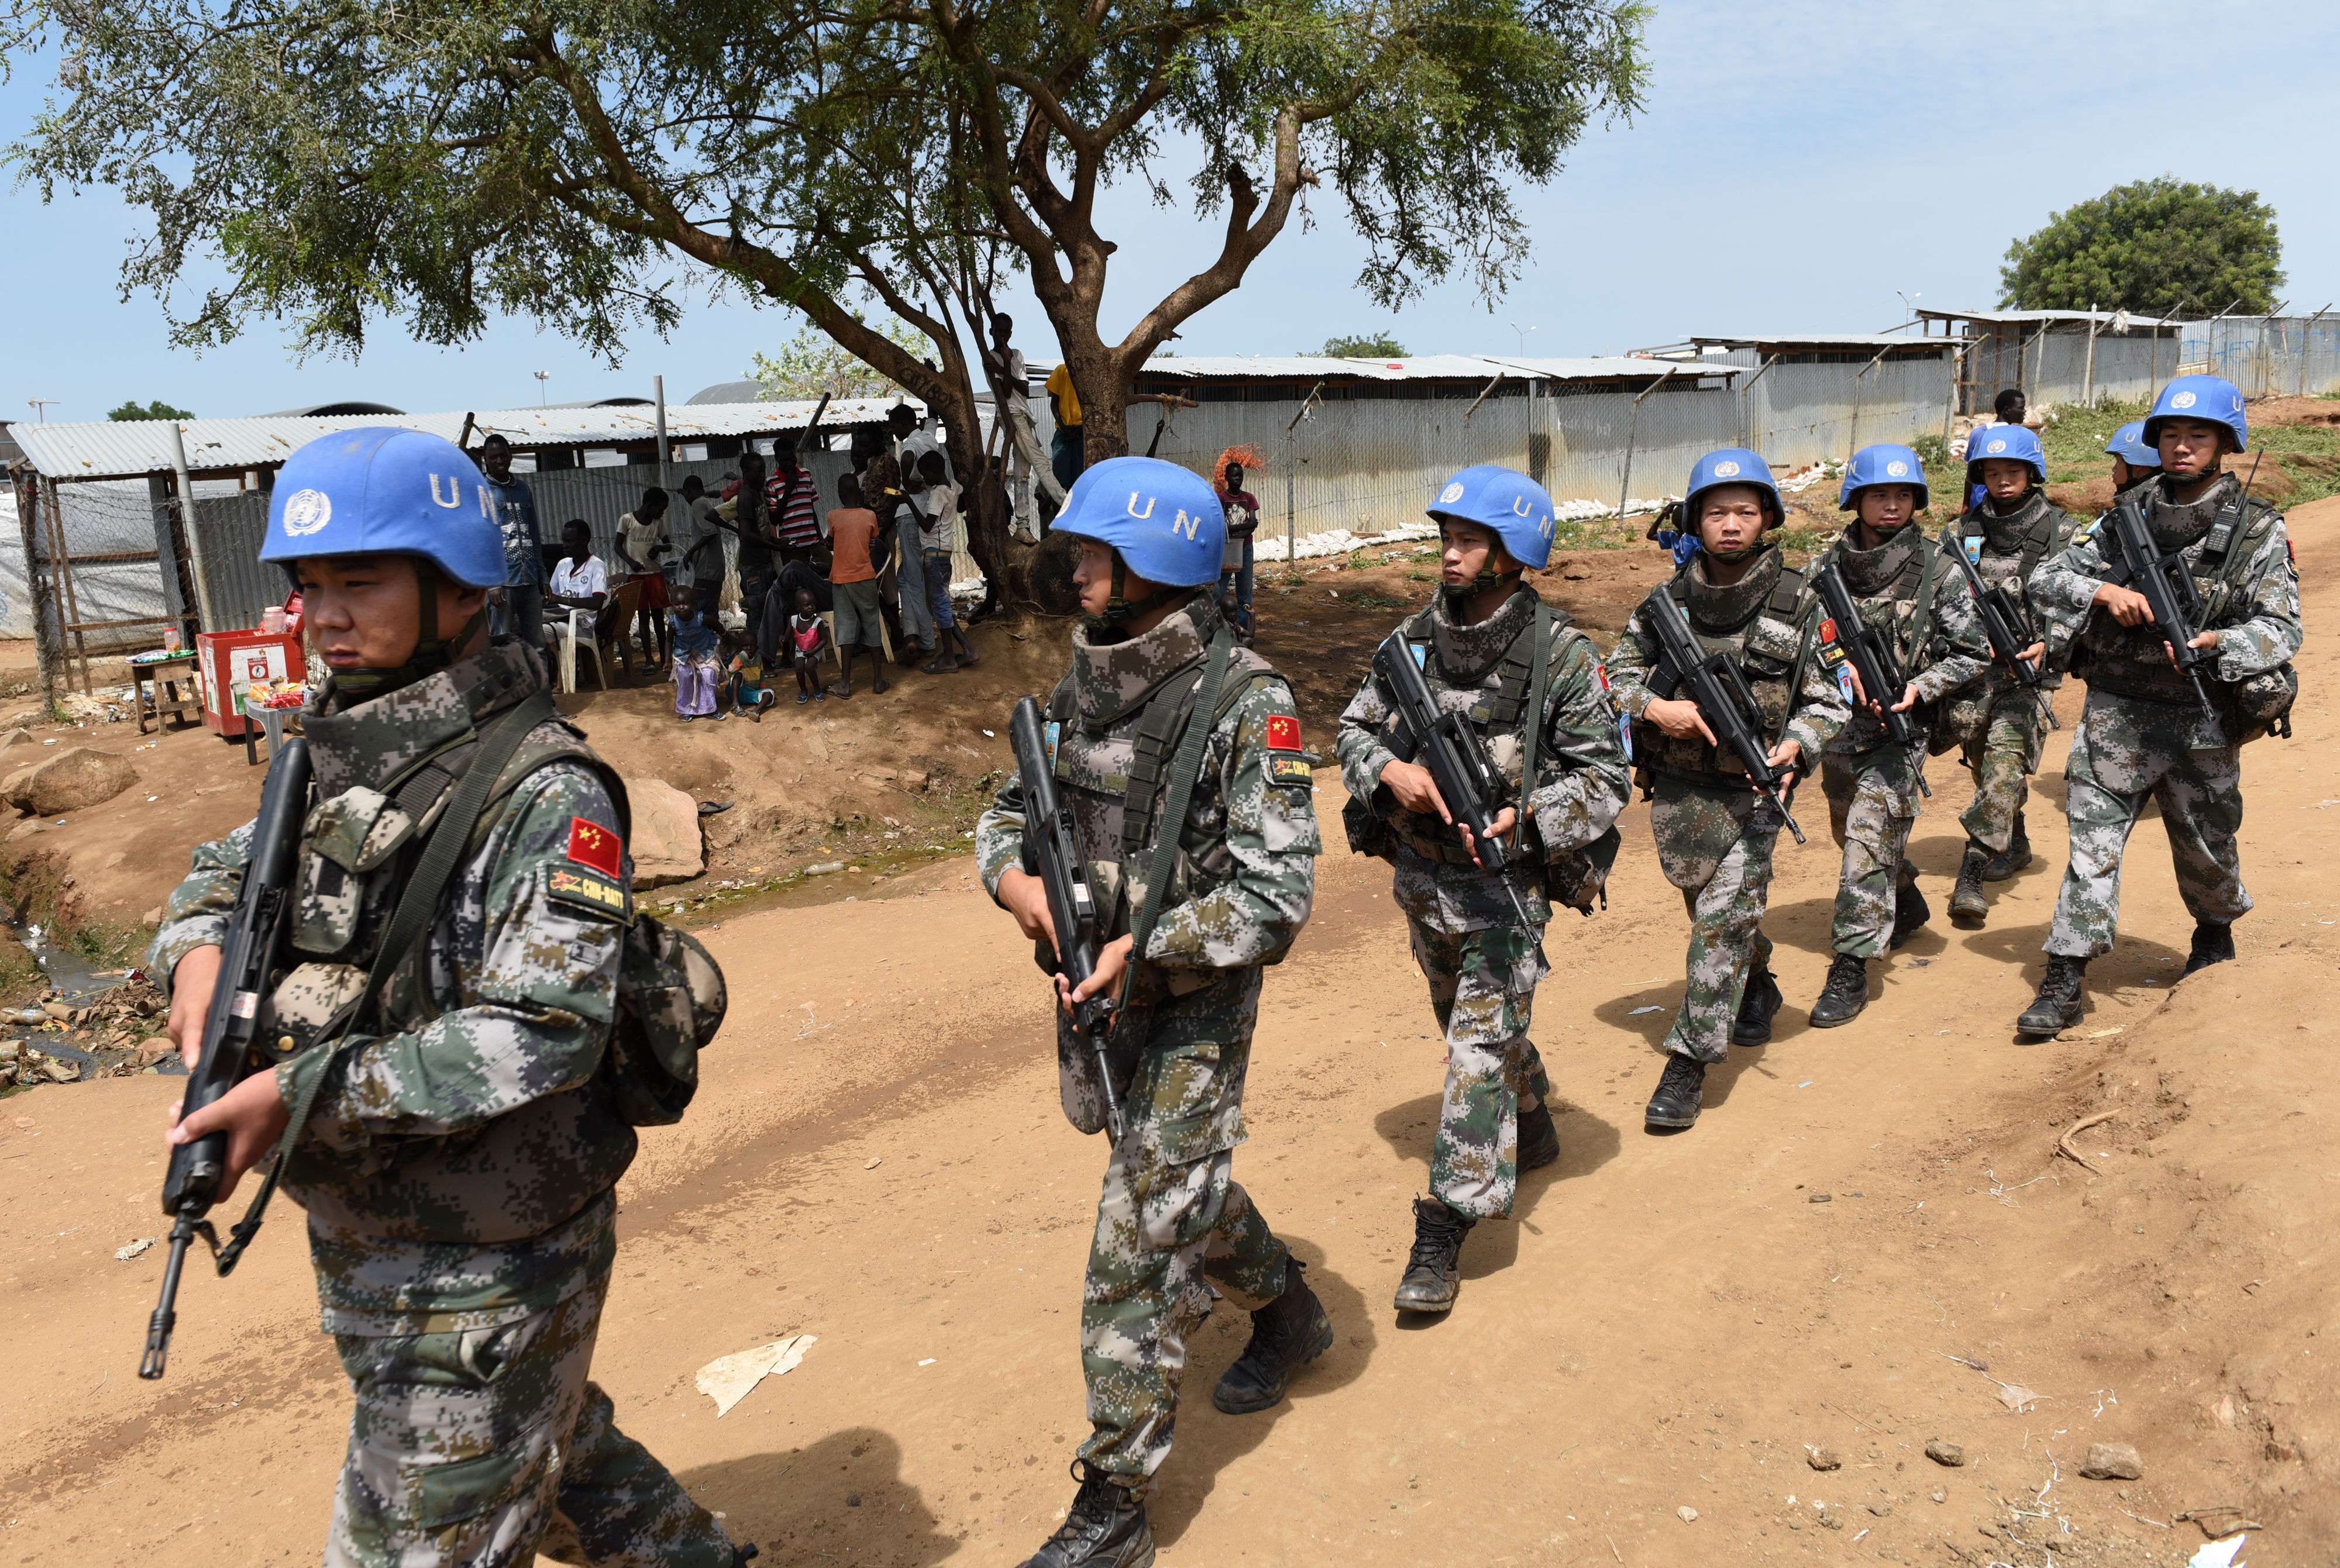 Chinese peacekeepers on patrol in Juba, the capital of South Sudan, last August. Photo: Xinhua